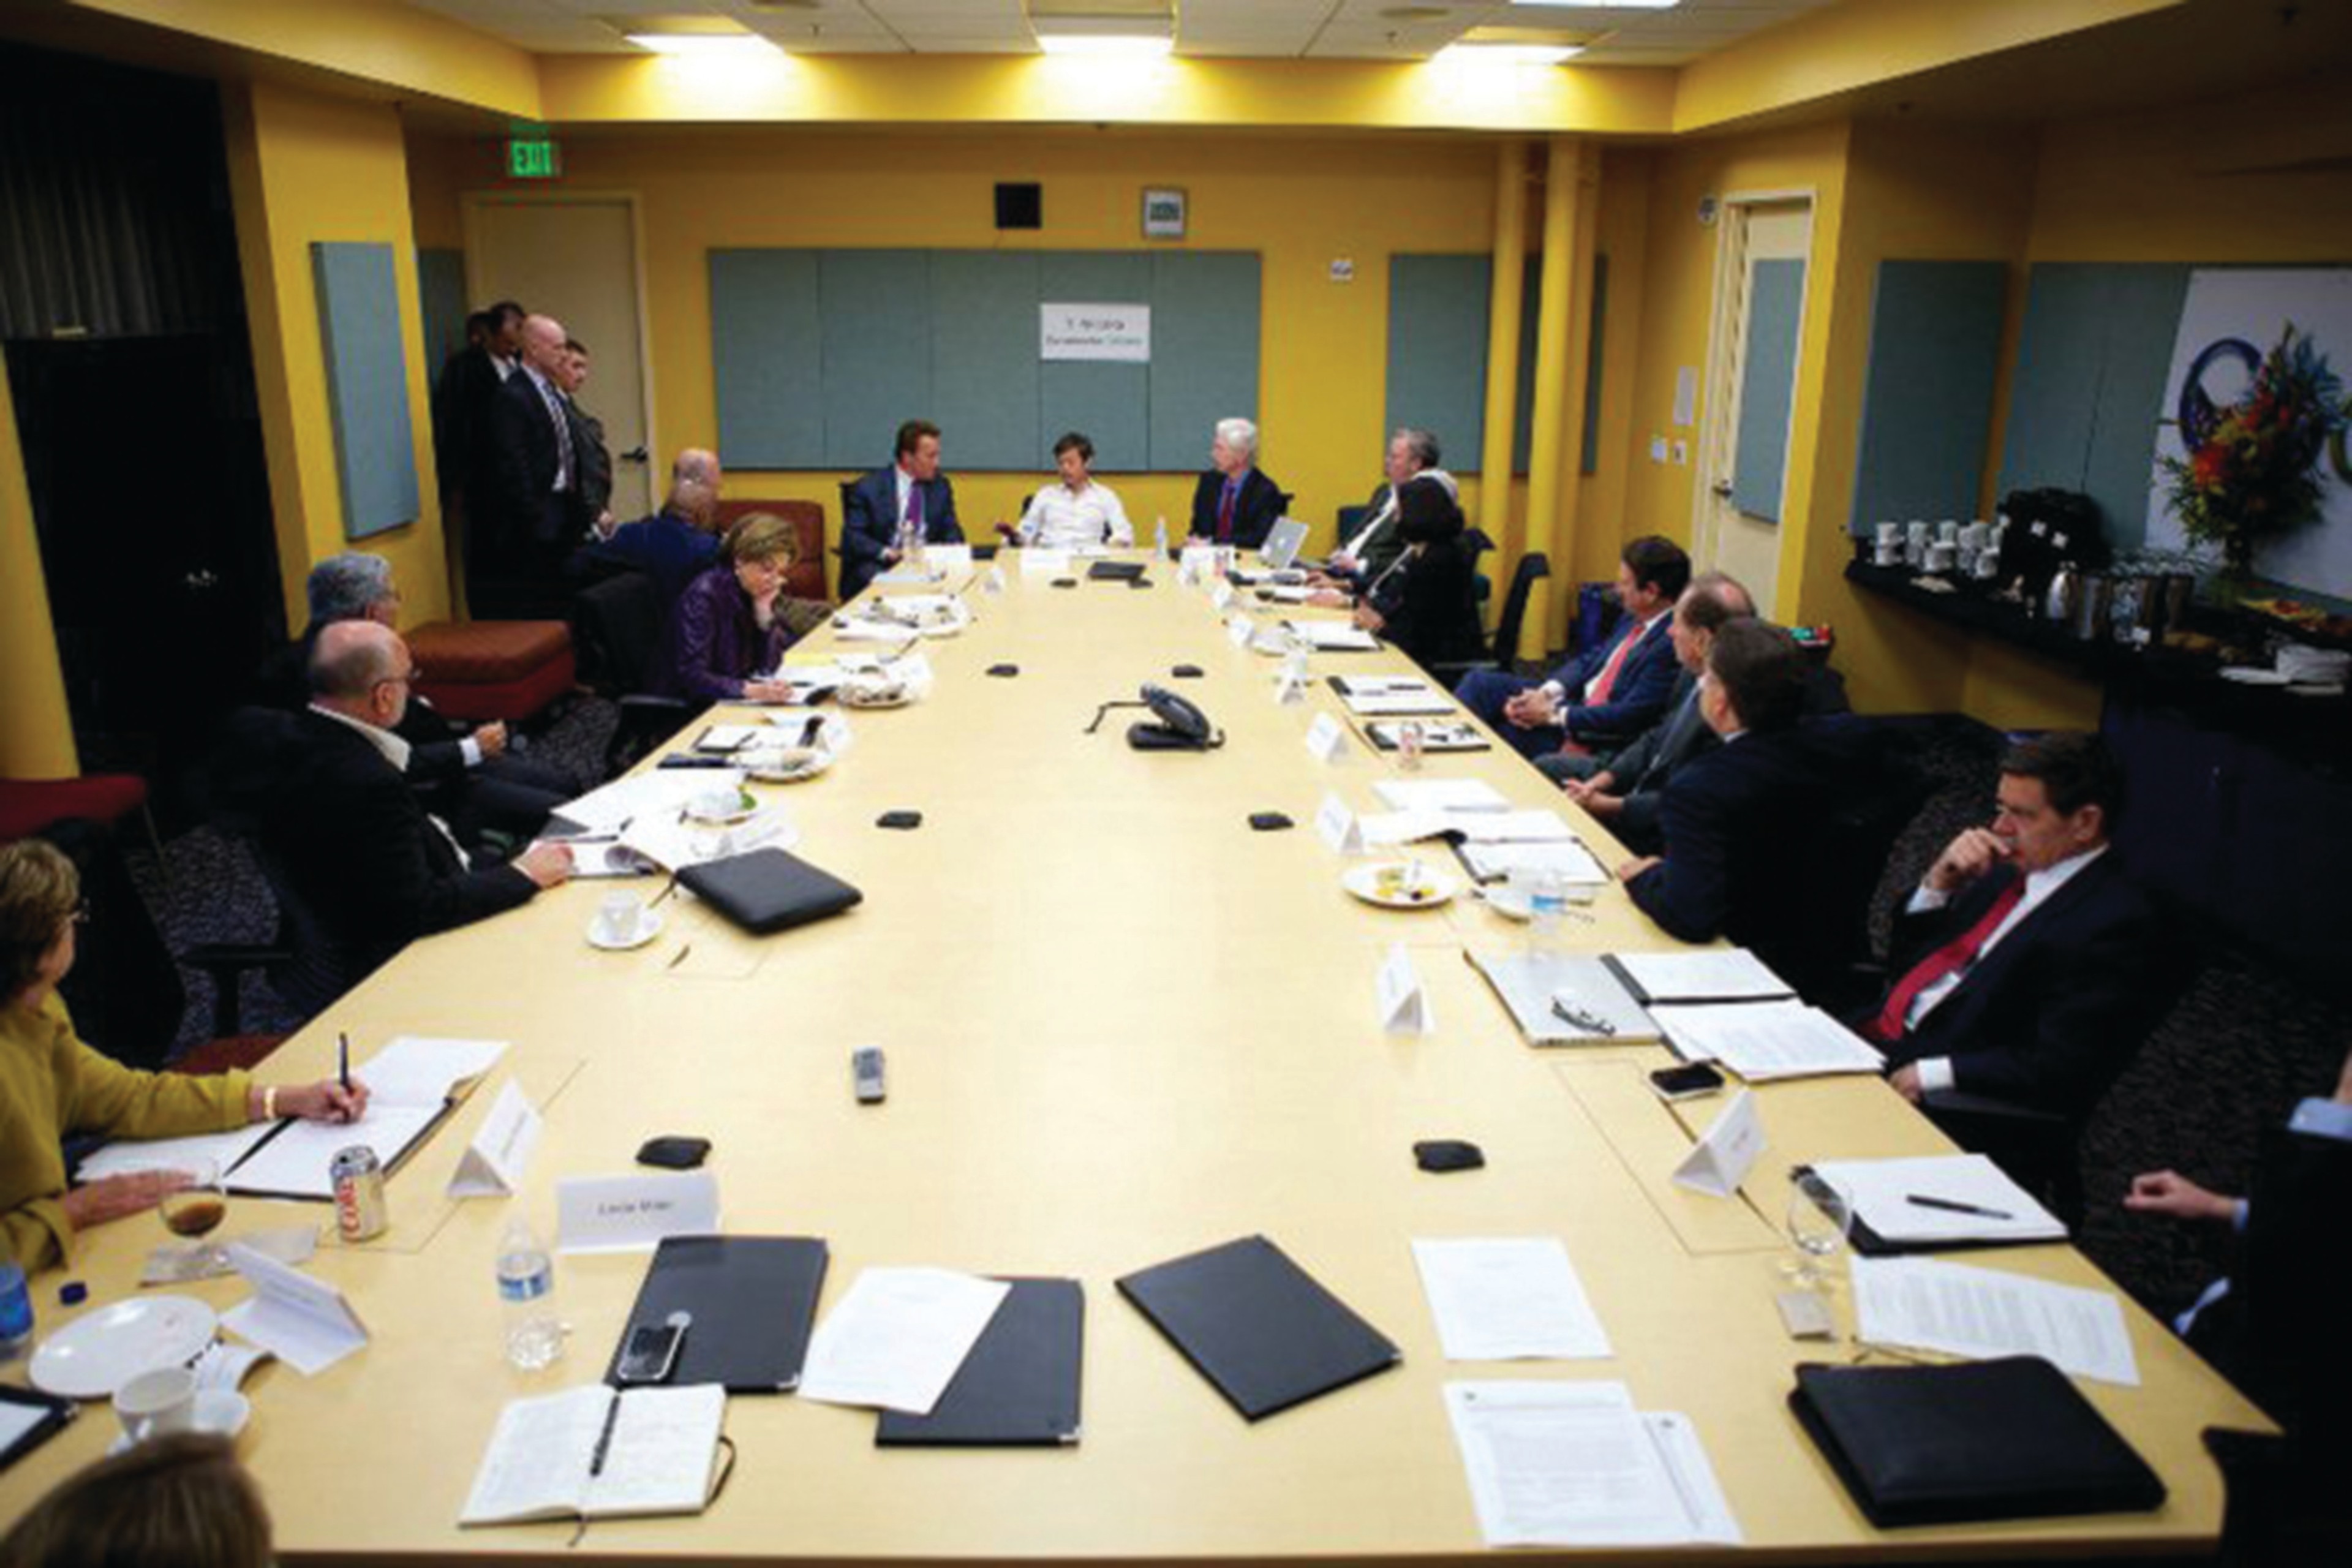 Laura Tyson, Arnold Schwarzenegger, Nicolas Berggruen, Gray Davis, and members of the Think Long Committee" in a large conference room